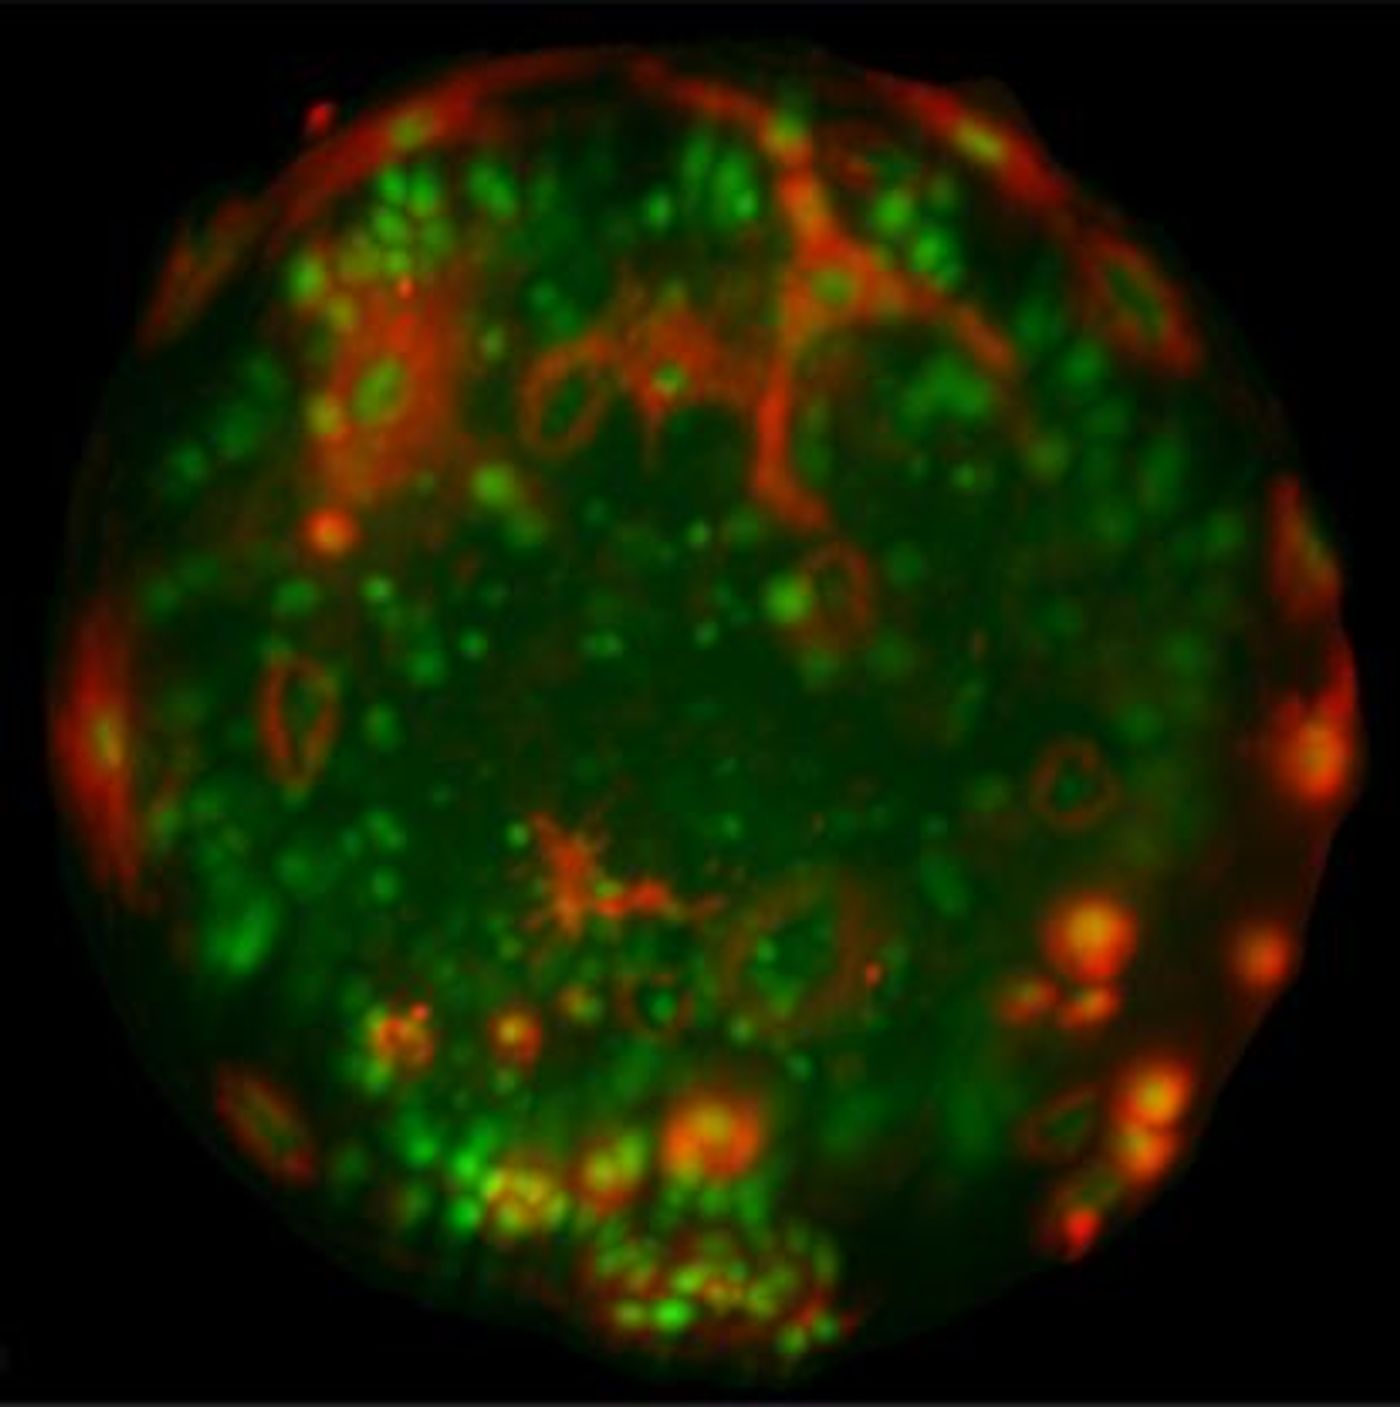 Three-dimensional reconstruction of a Stage 3 S. mediterranea embryo, stained with a pan-embryonic cell marker (red) and a nuclear dye (green). / Credit: Image courtesy of Erin Davies, Ph.D., Amanda Kroesen, and Sean McKinney, Ph.D.